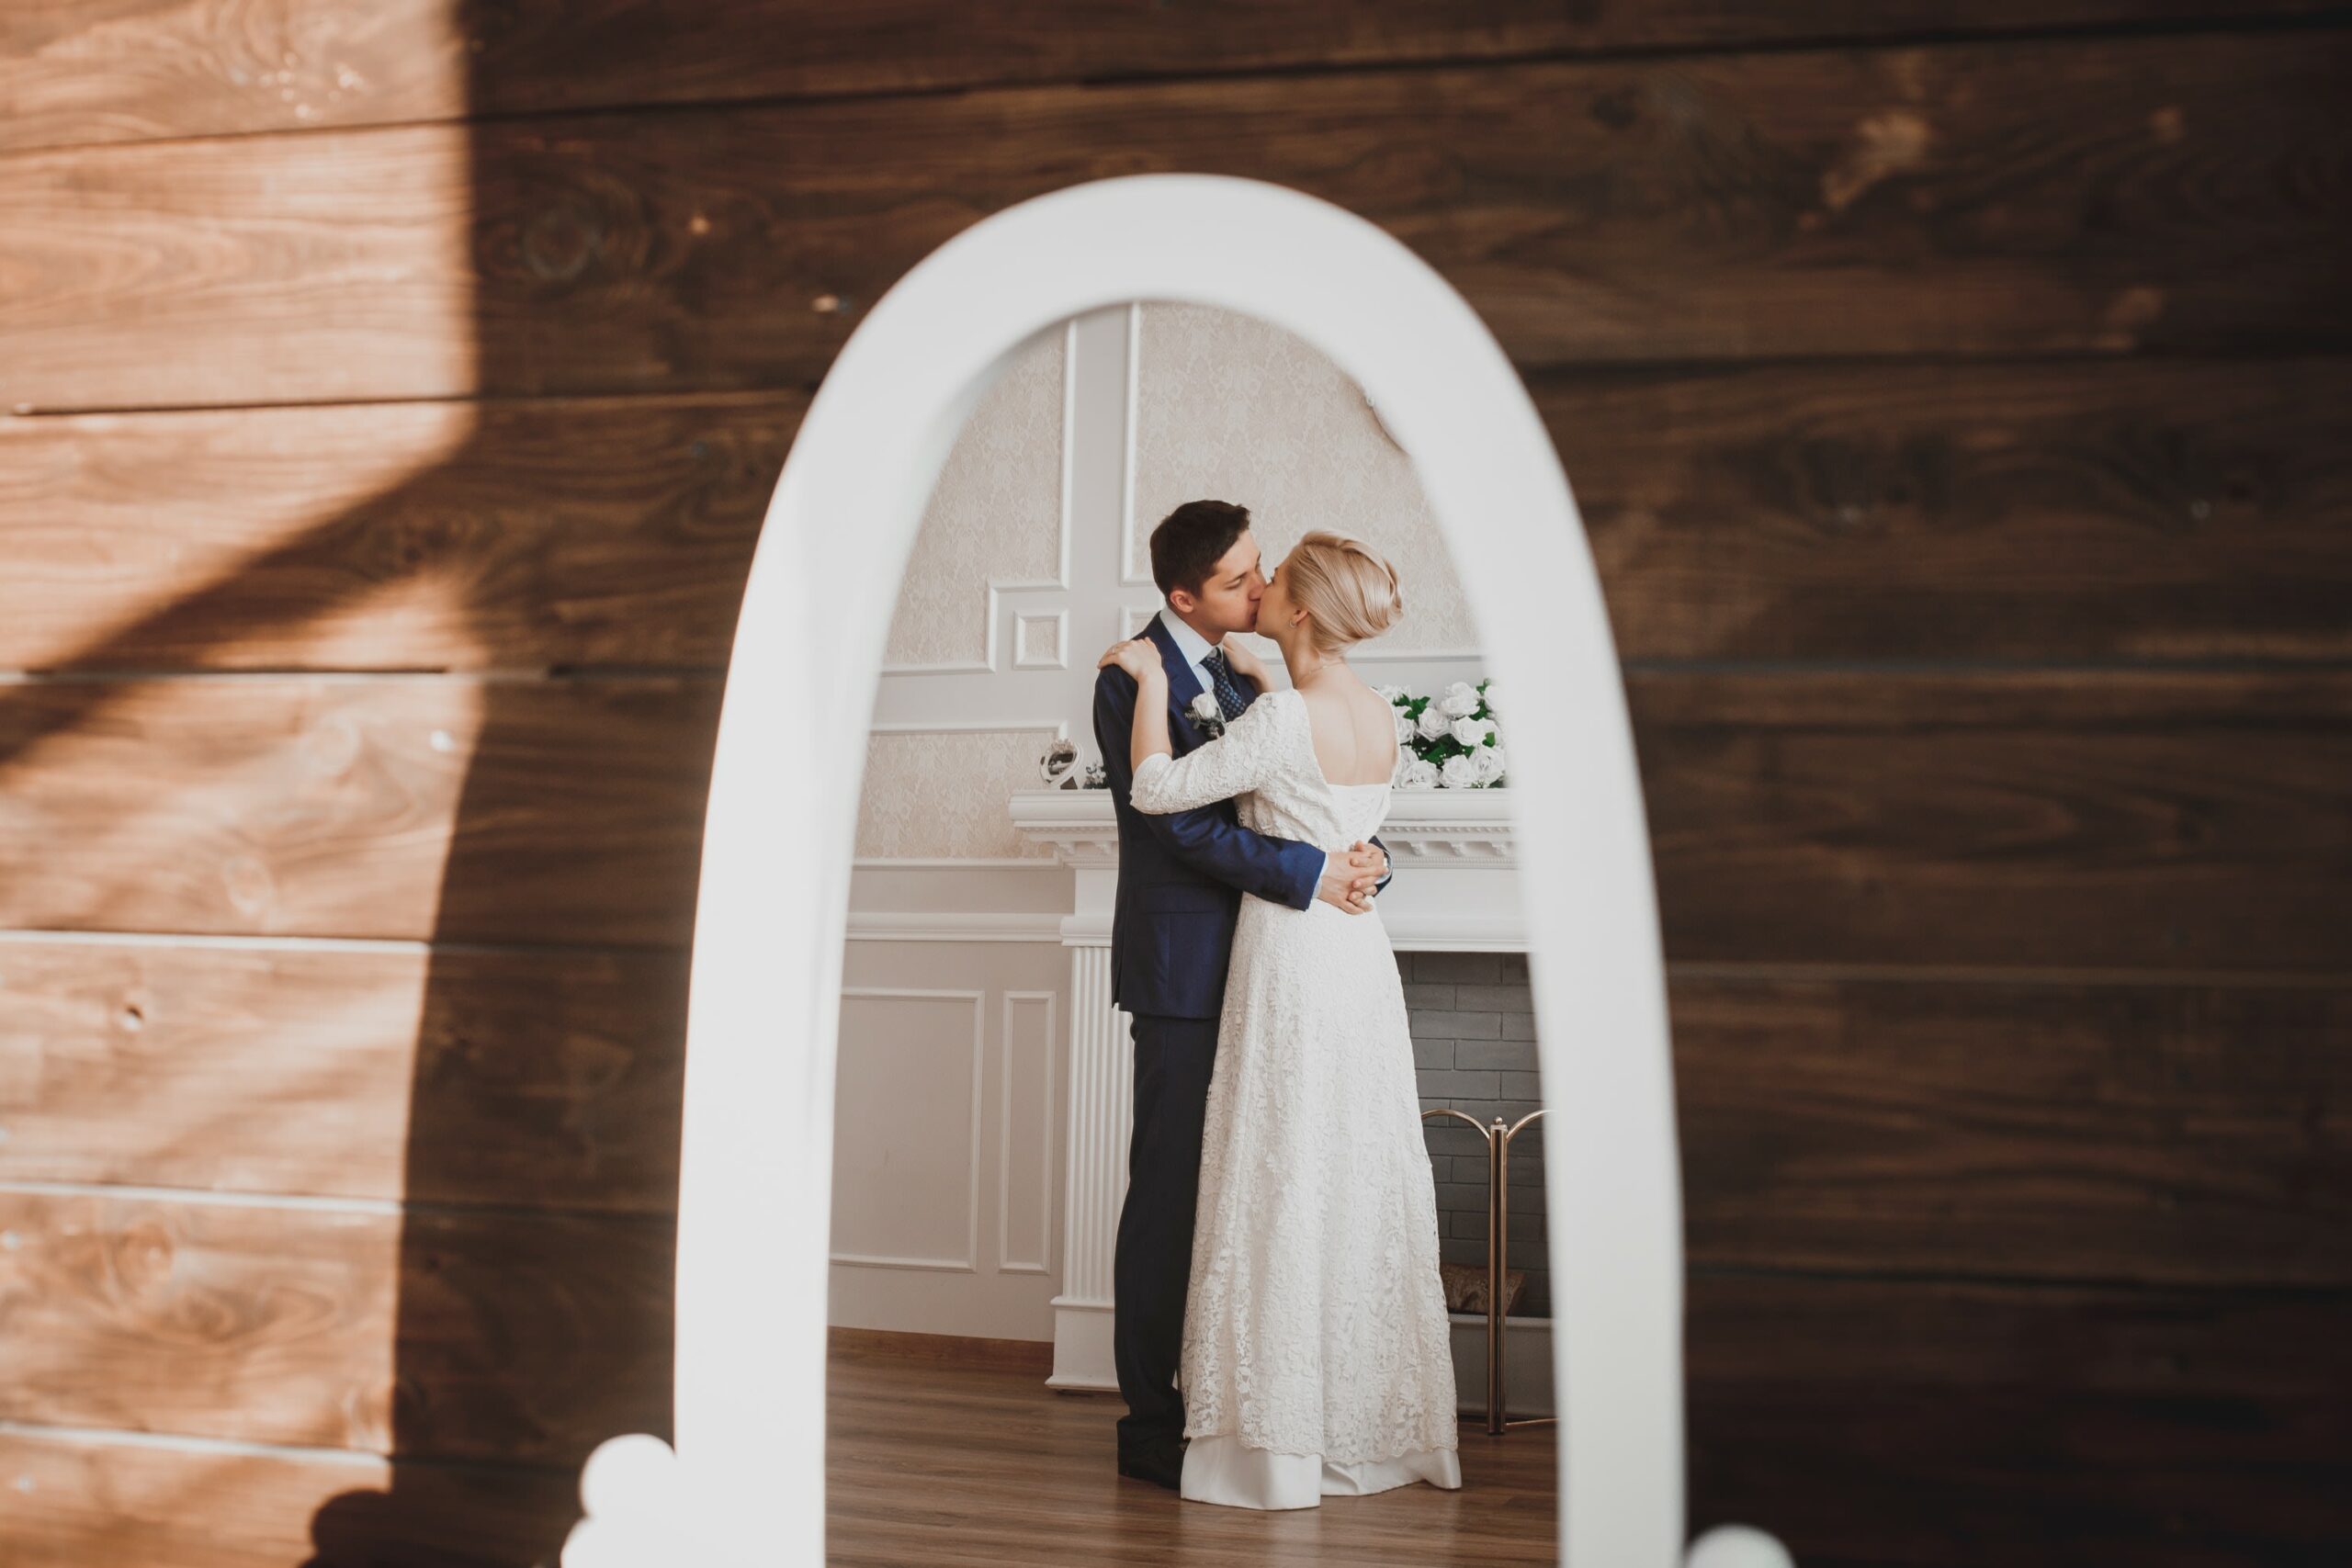 Bridebook.co.uk Couple kissing in reflection of dresser mirror